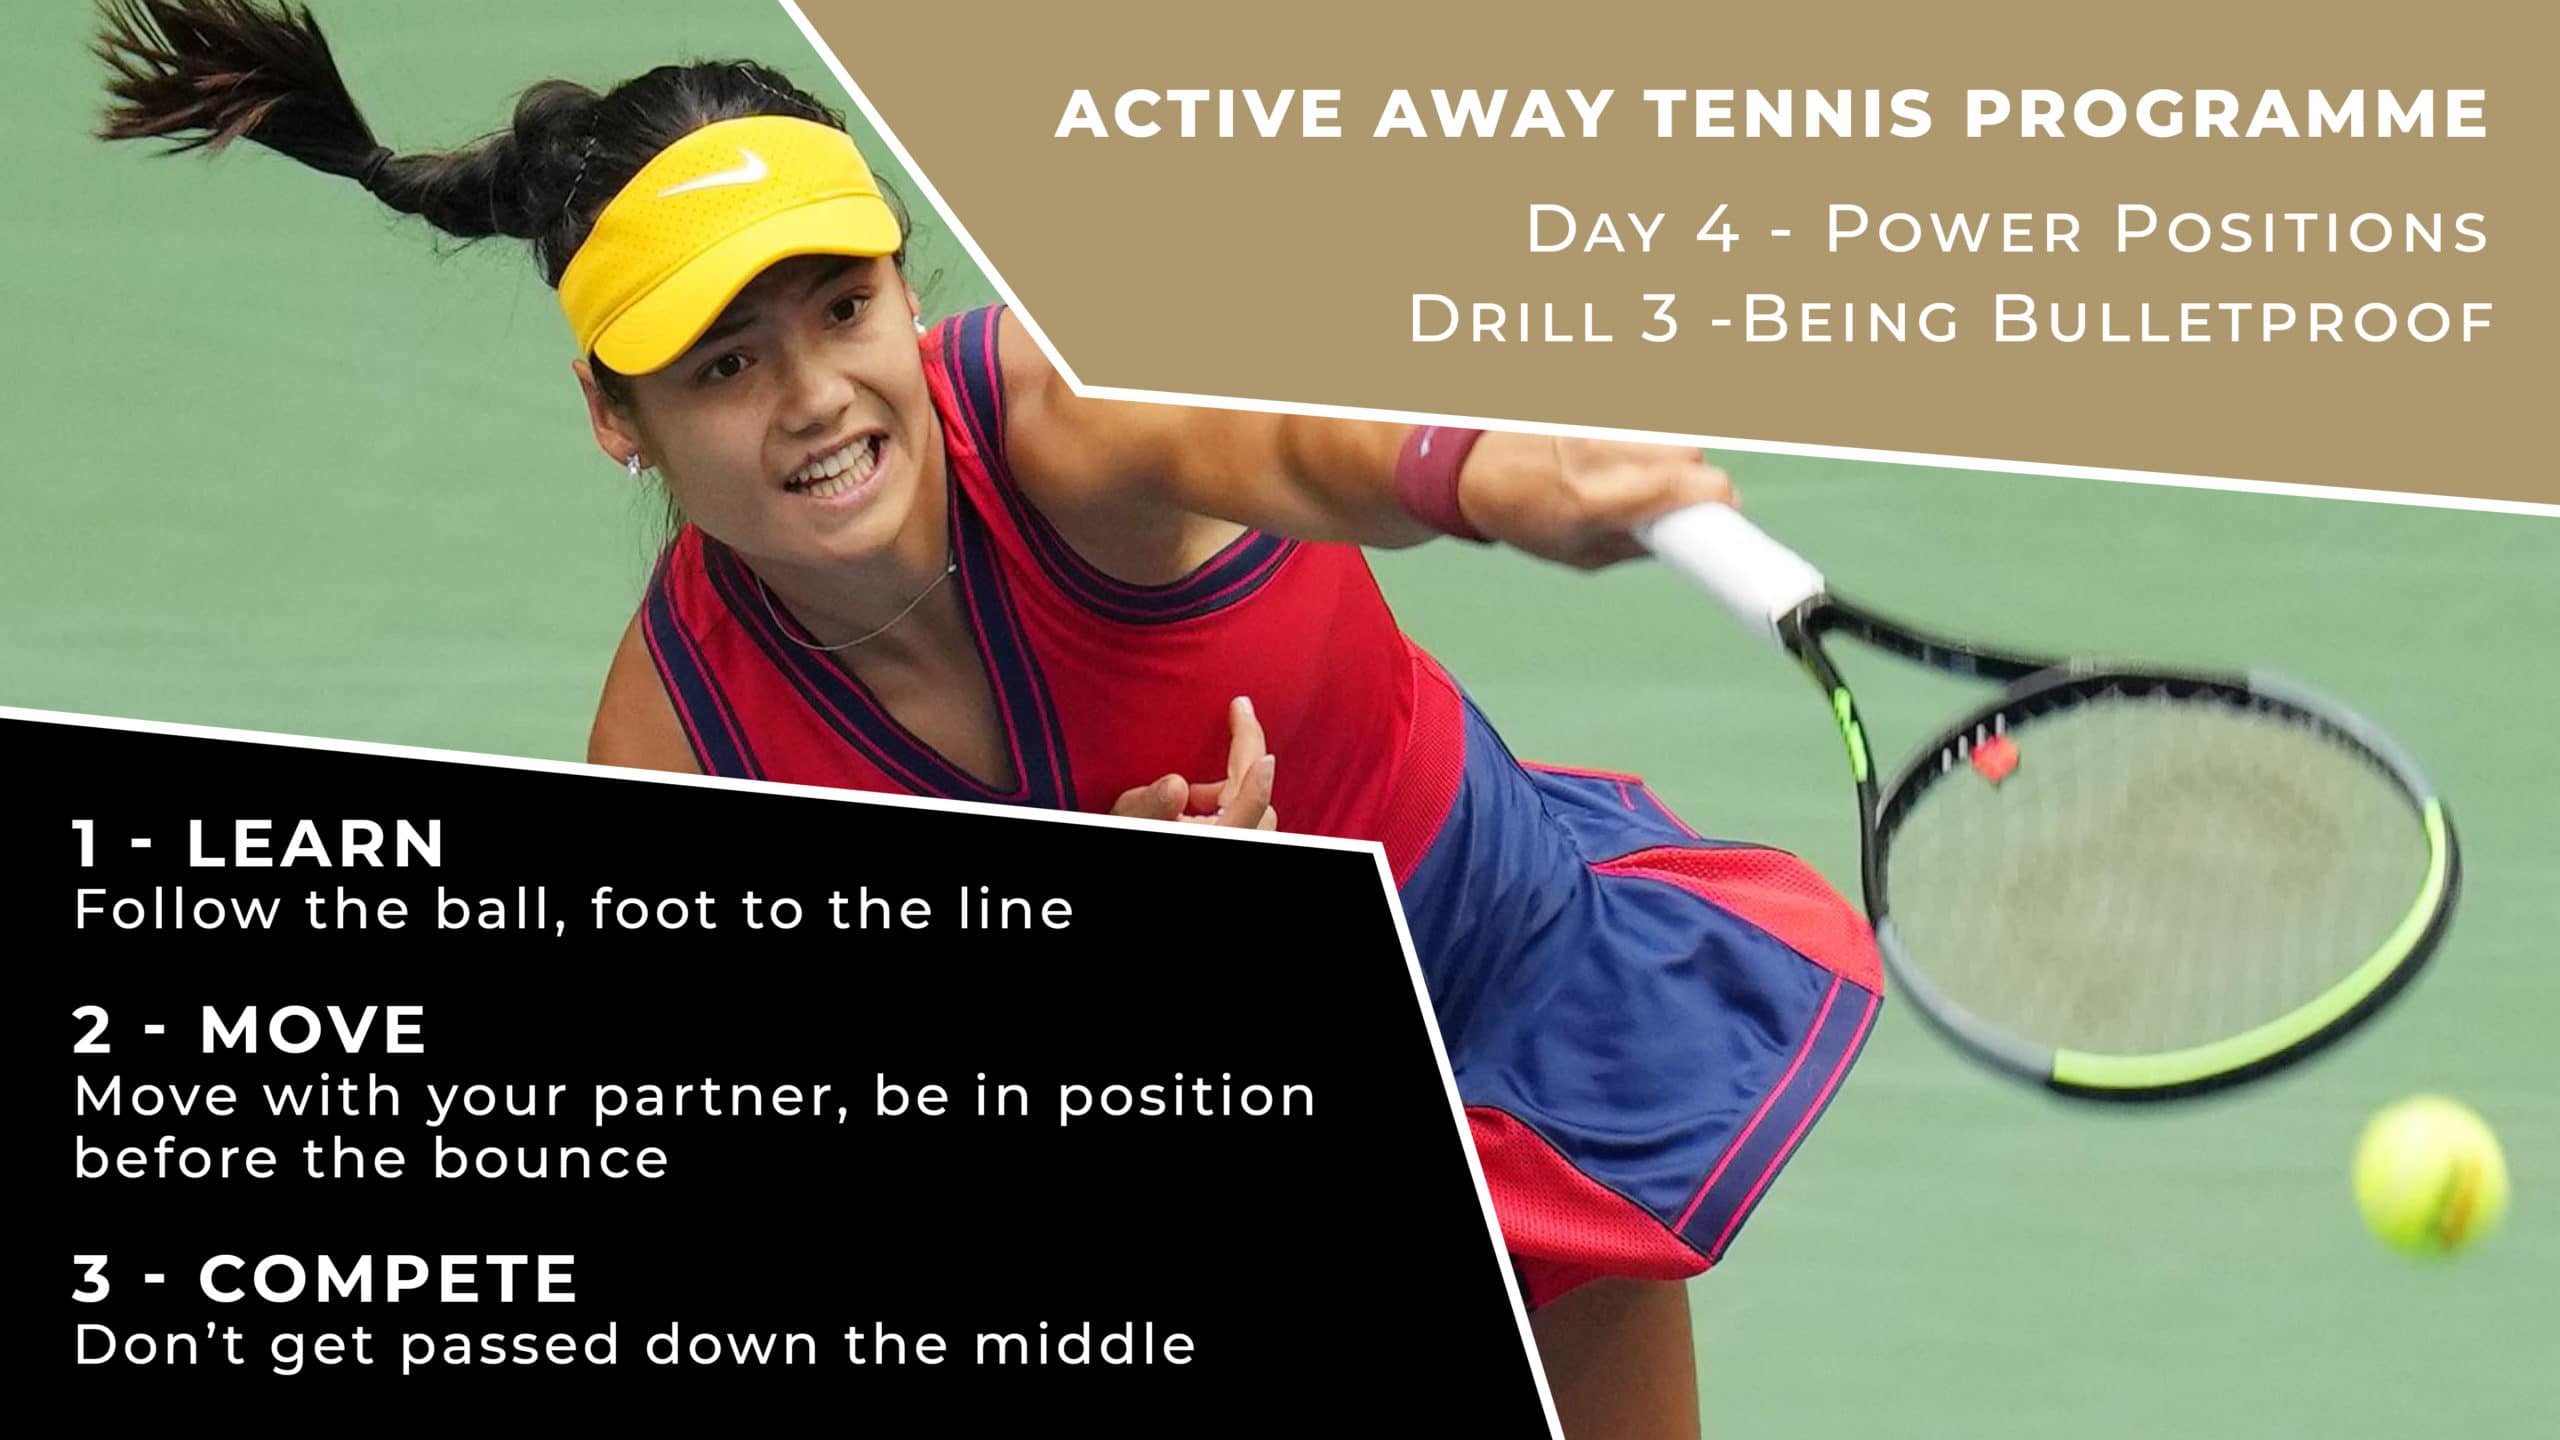 Day 4 - Power Positions Drill 3 - Being Bulletproof | Active Away Tennis Programme